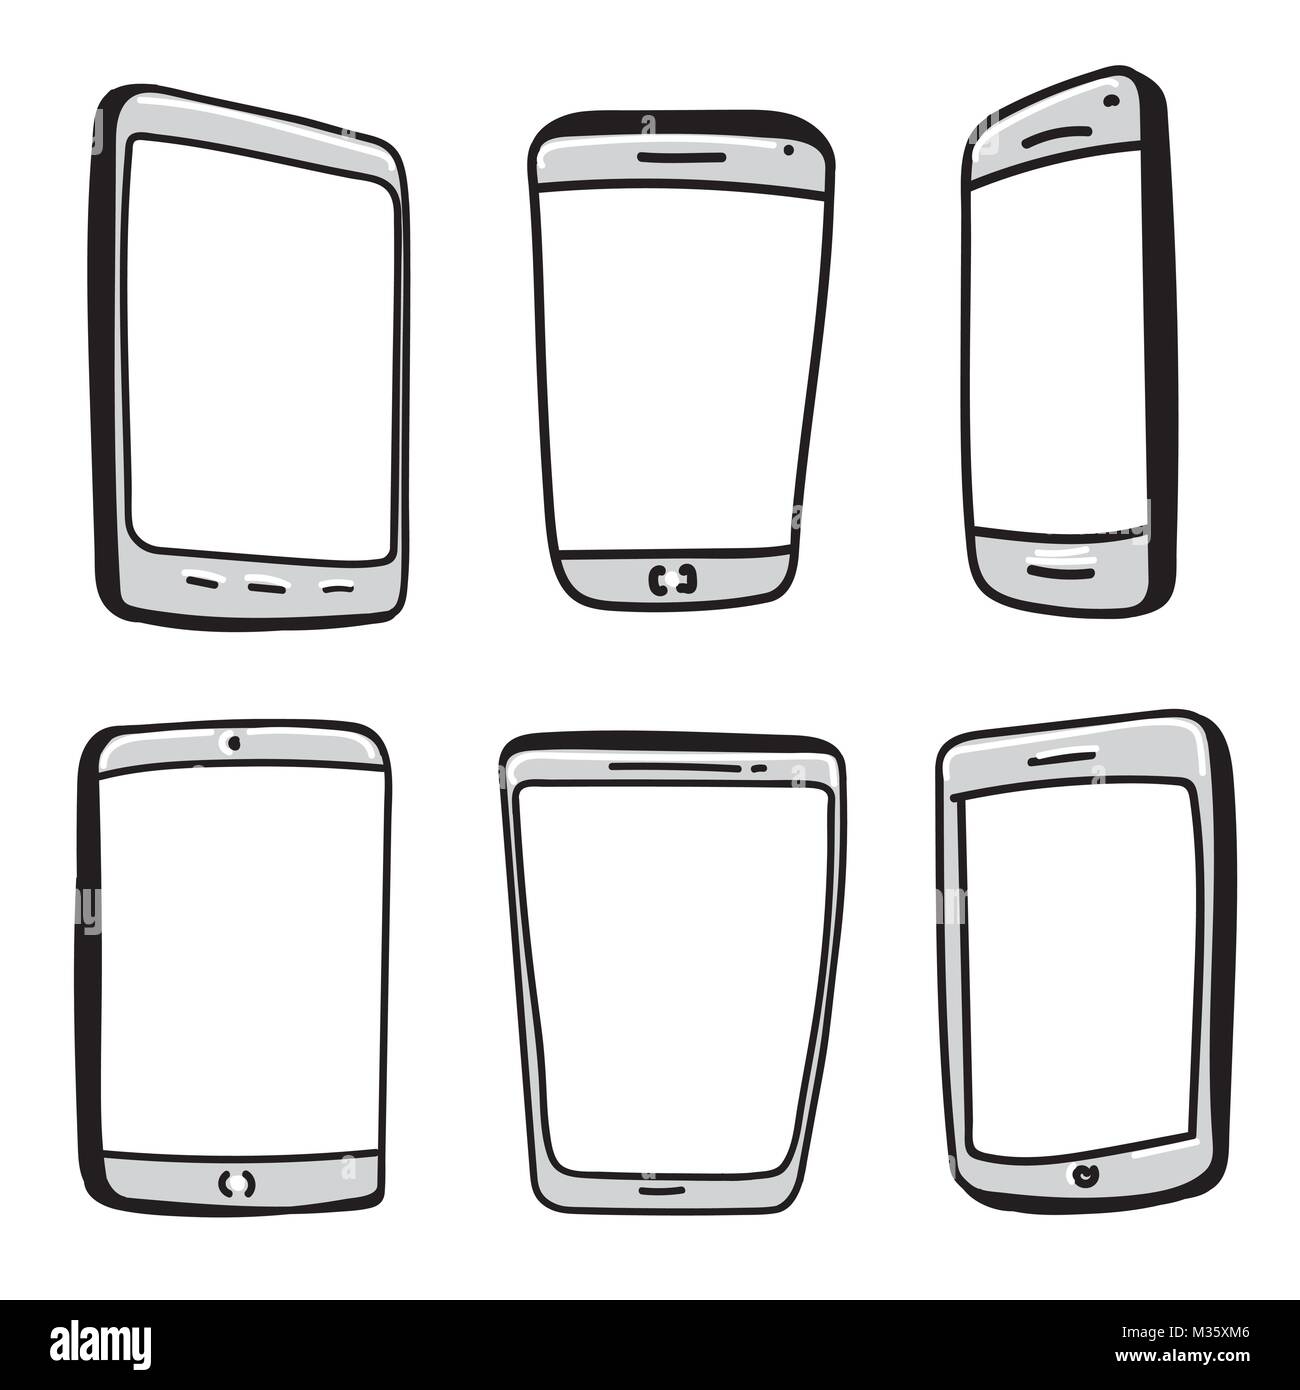 Mobile Phone and Digital Tablet Hand Drawn Vector Icon Set. Stock Vector